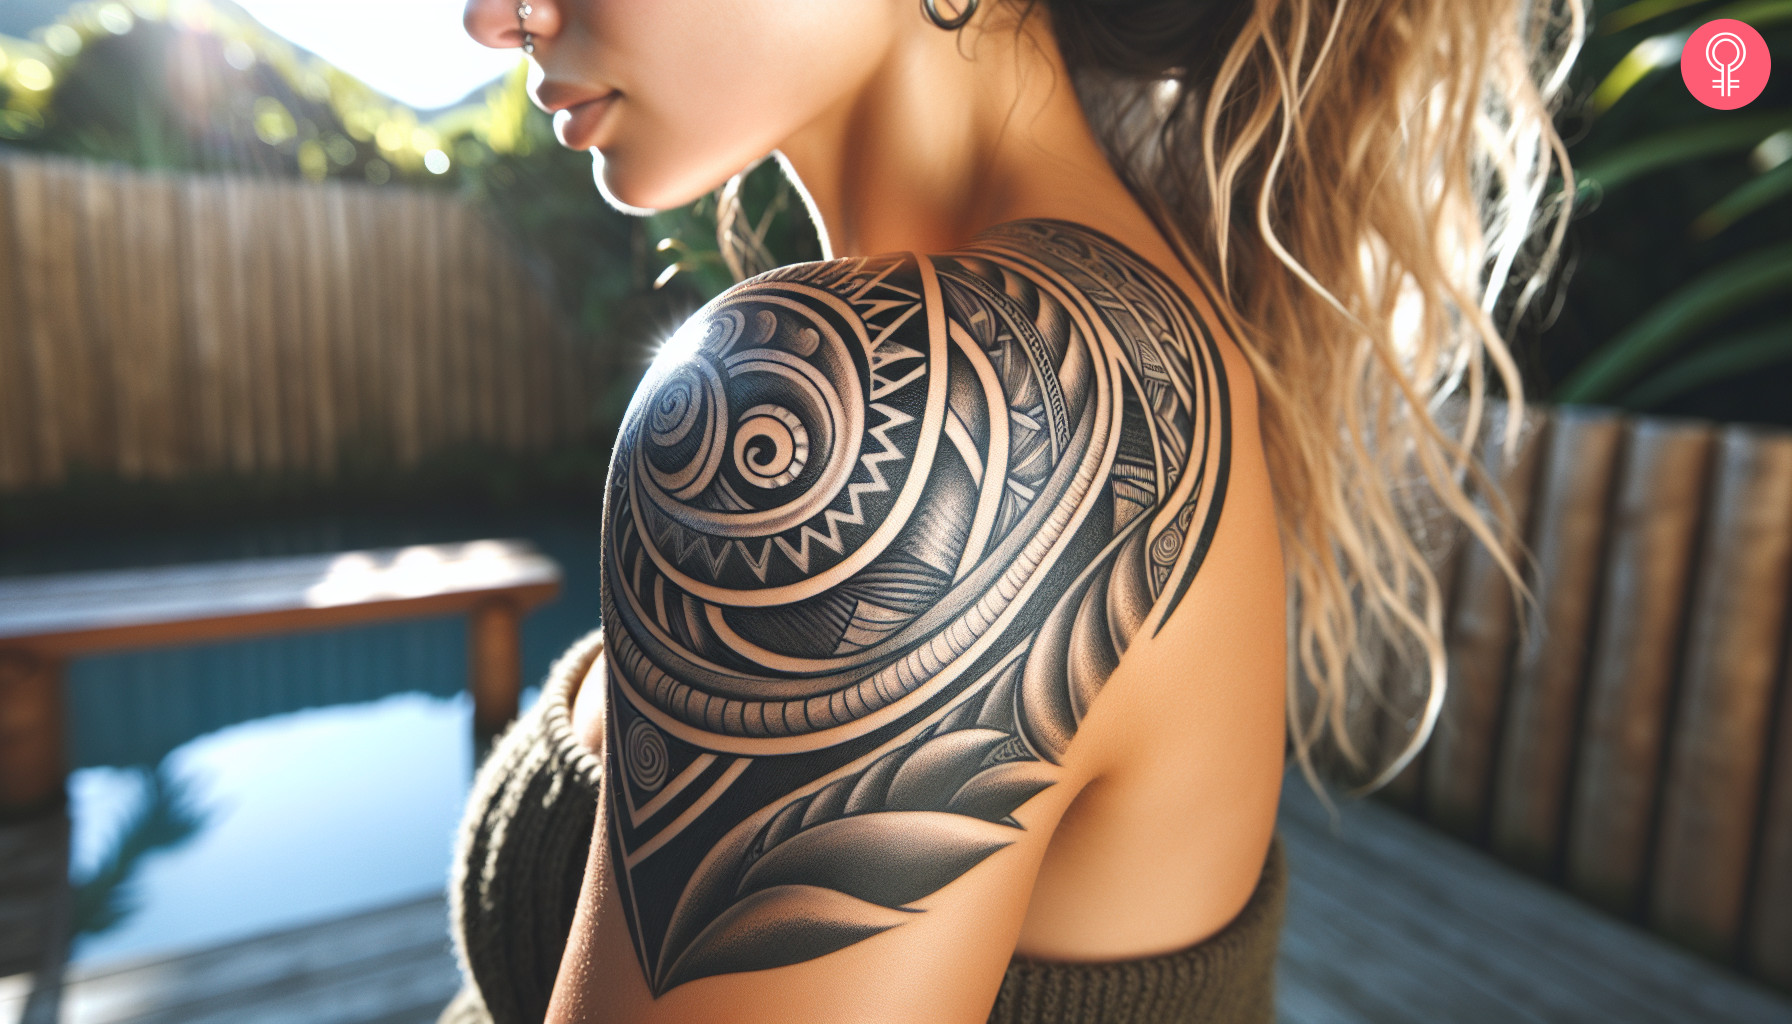 Aesthetic gray ink maori tattoo on the shoulder of a woman